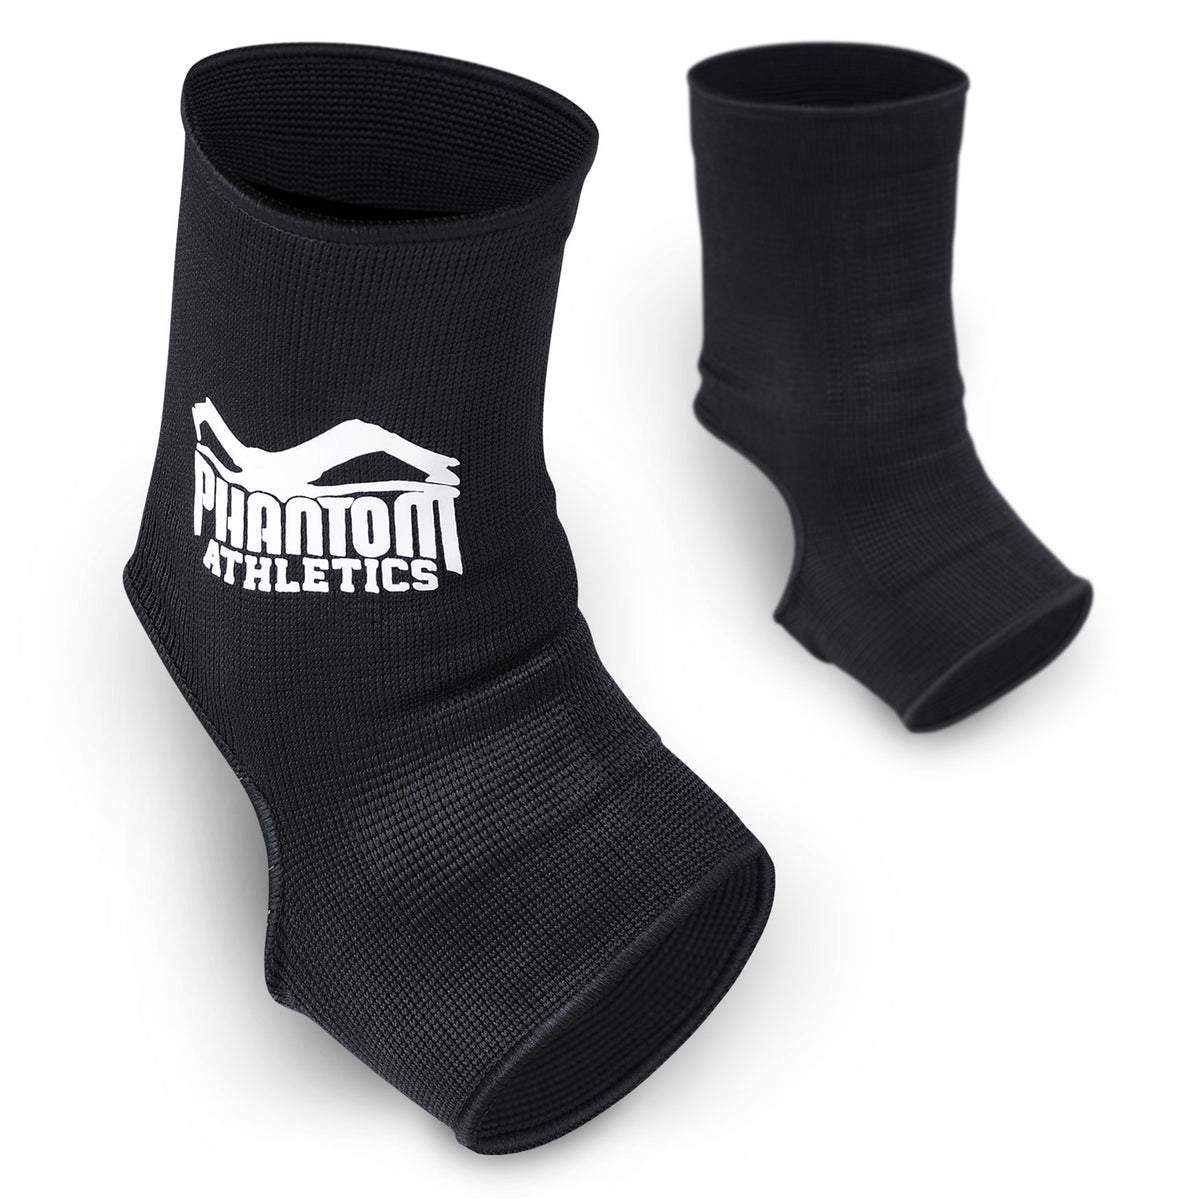 The Phantom ankle pads Impact for martial arts training and competition.